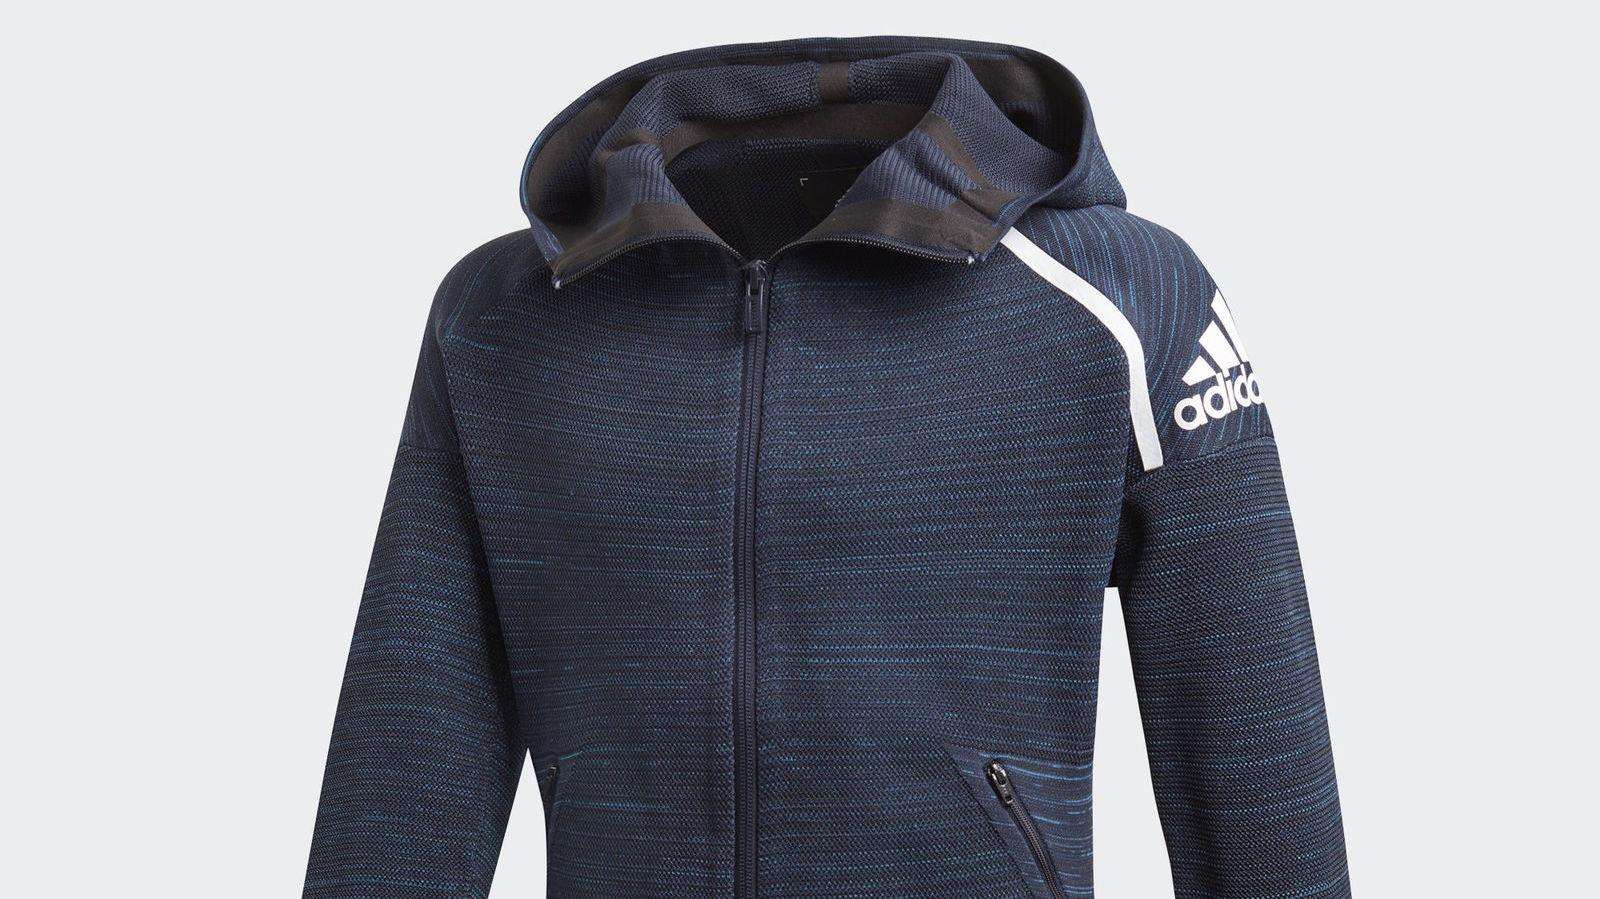 You can save £33.98 when buying this adidas top